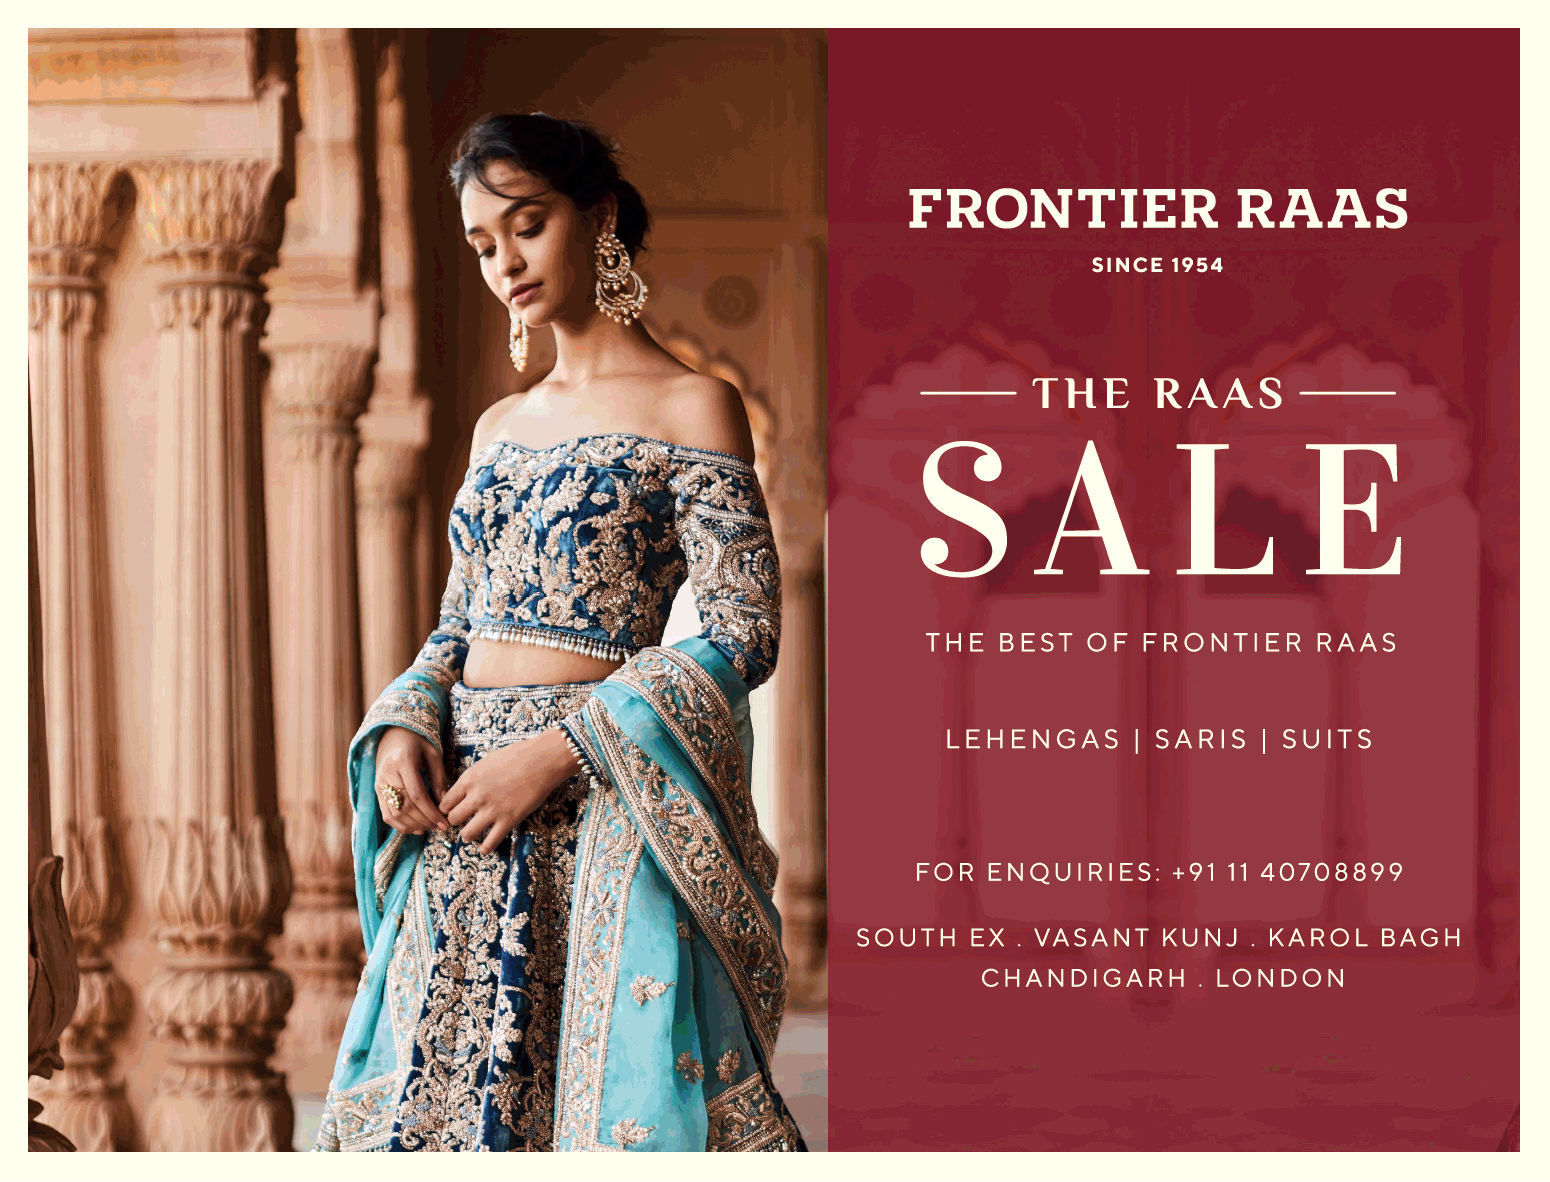 frontier-raas-since-1954-the-raas-sale-ad-delhi-times-23-02-2019.png